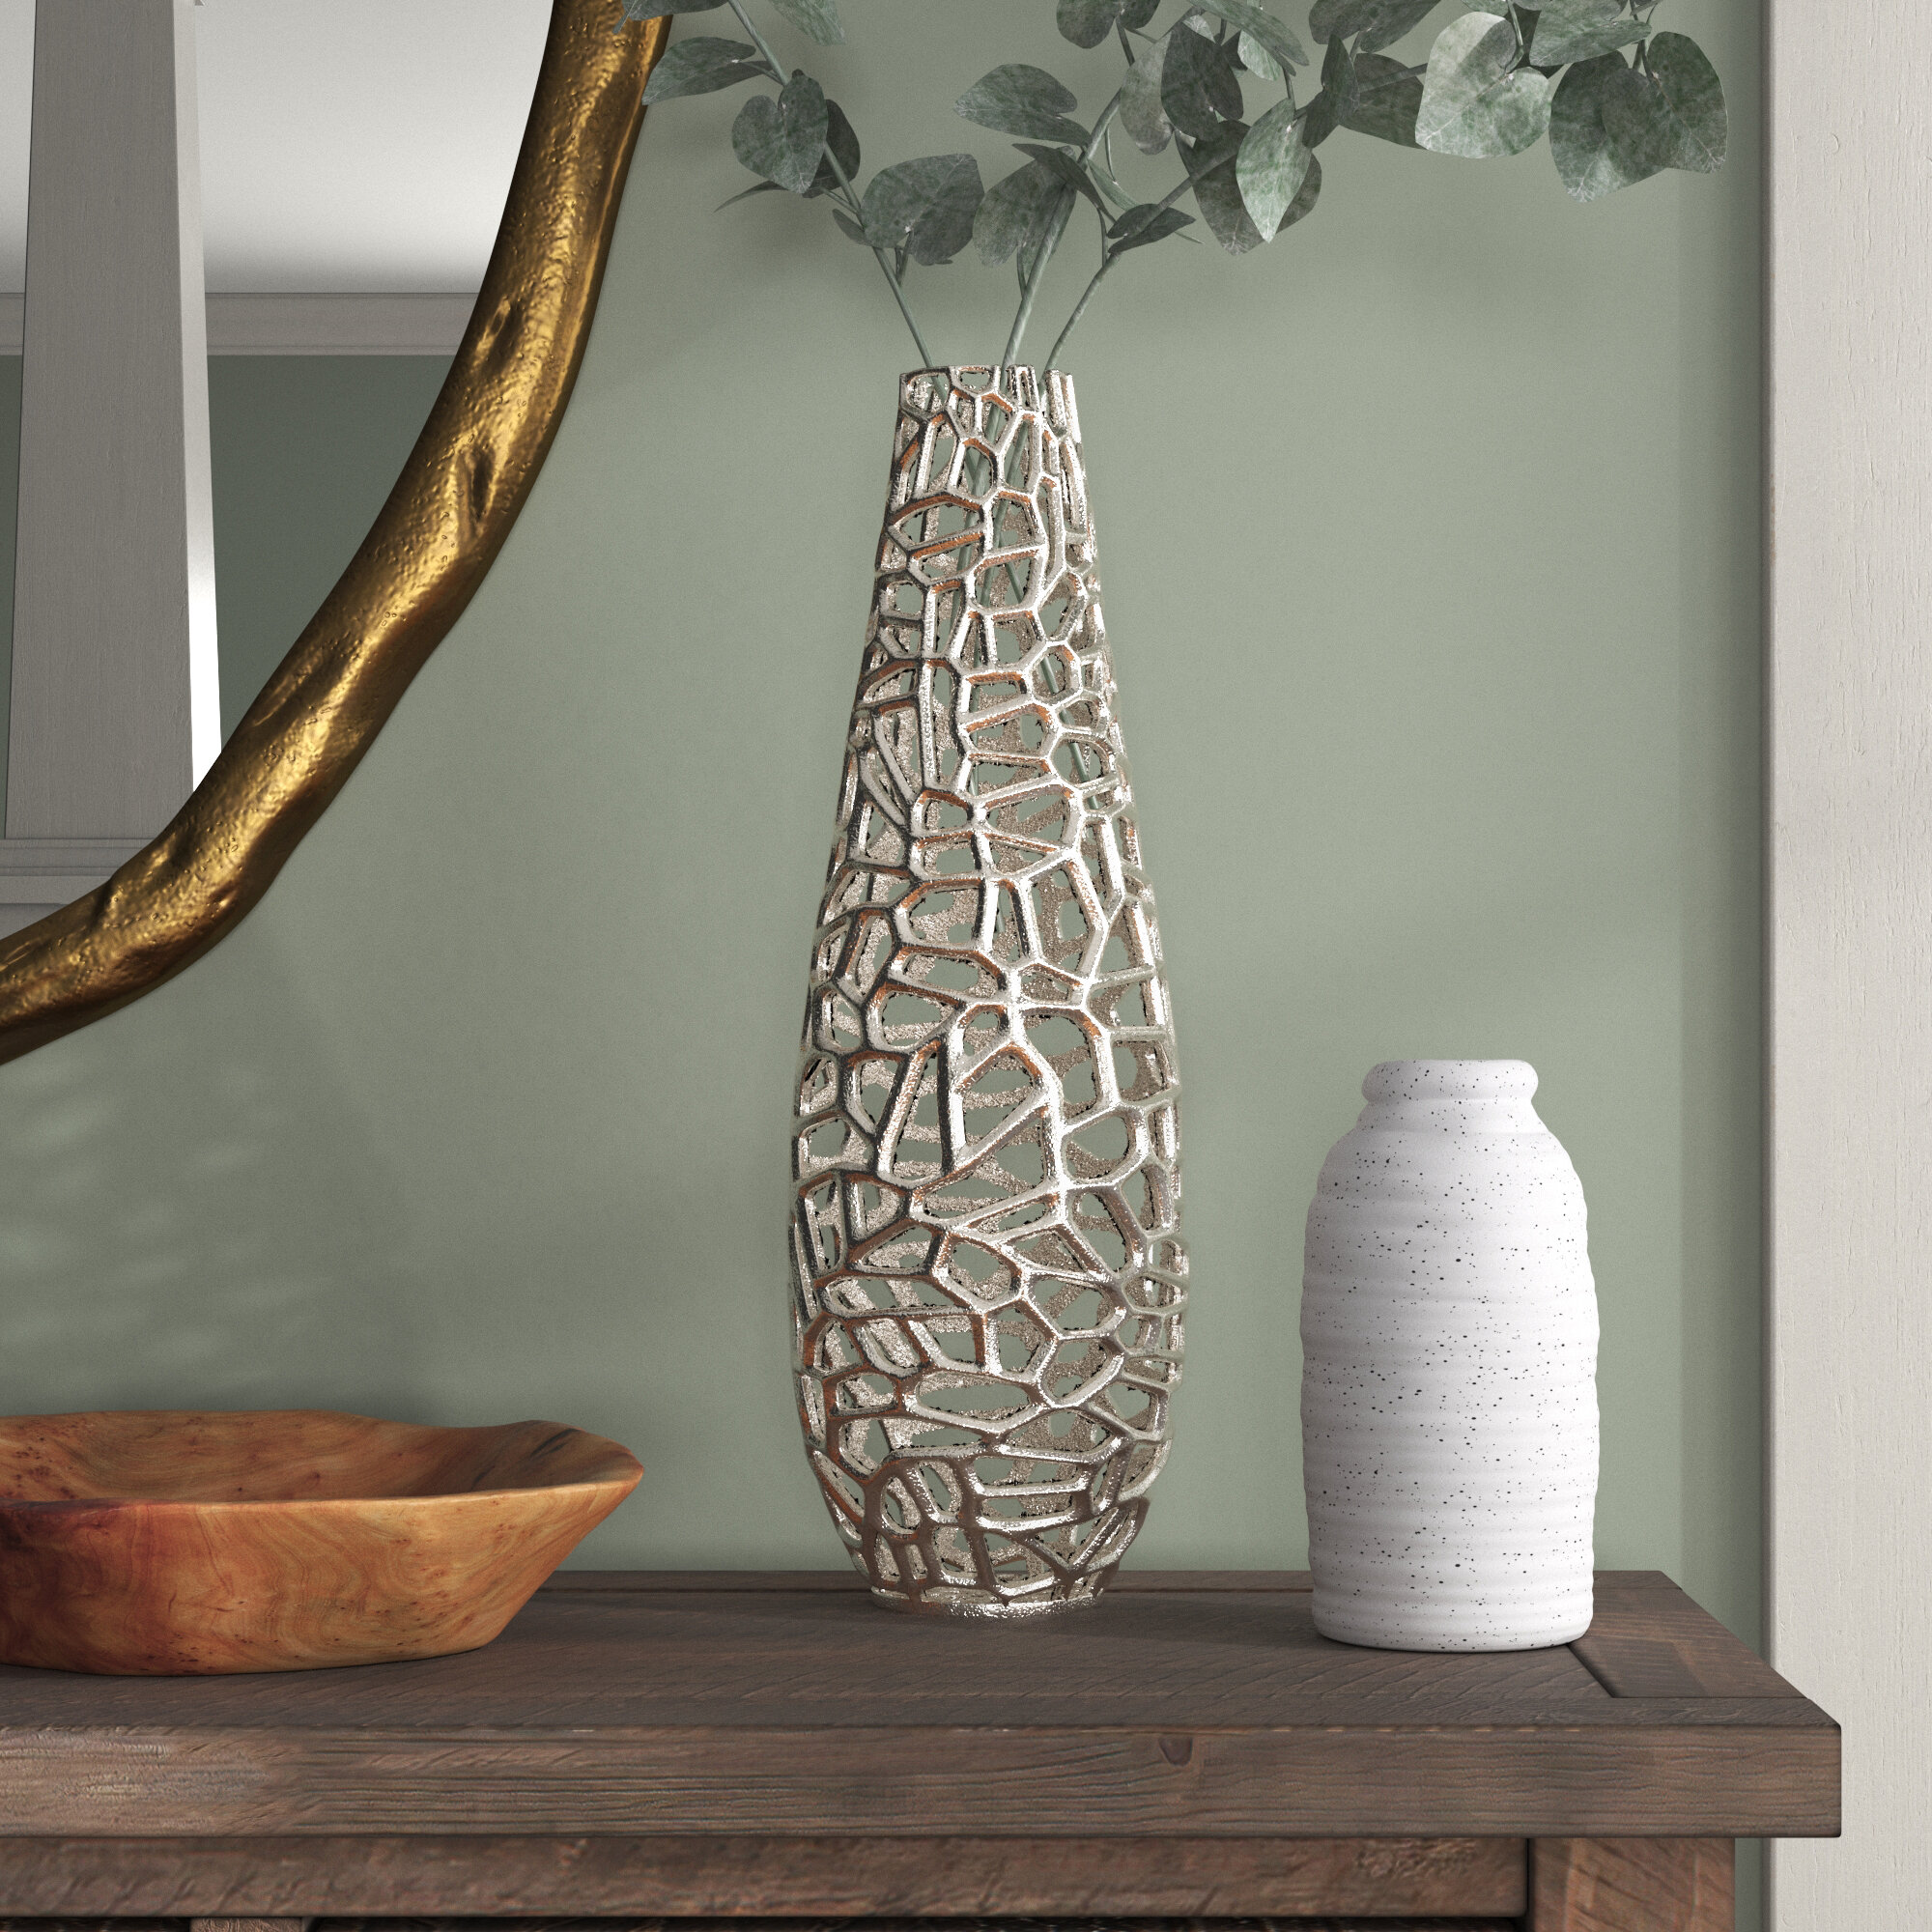 13 Ceramic Oval Vase - Contemporary Glam Abstract Cut-Out Vase in Beaded -  Creative Home or Office Decorative Table Accent